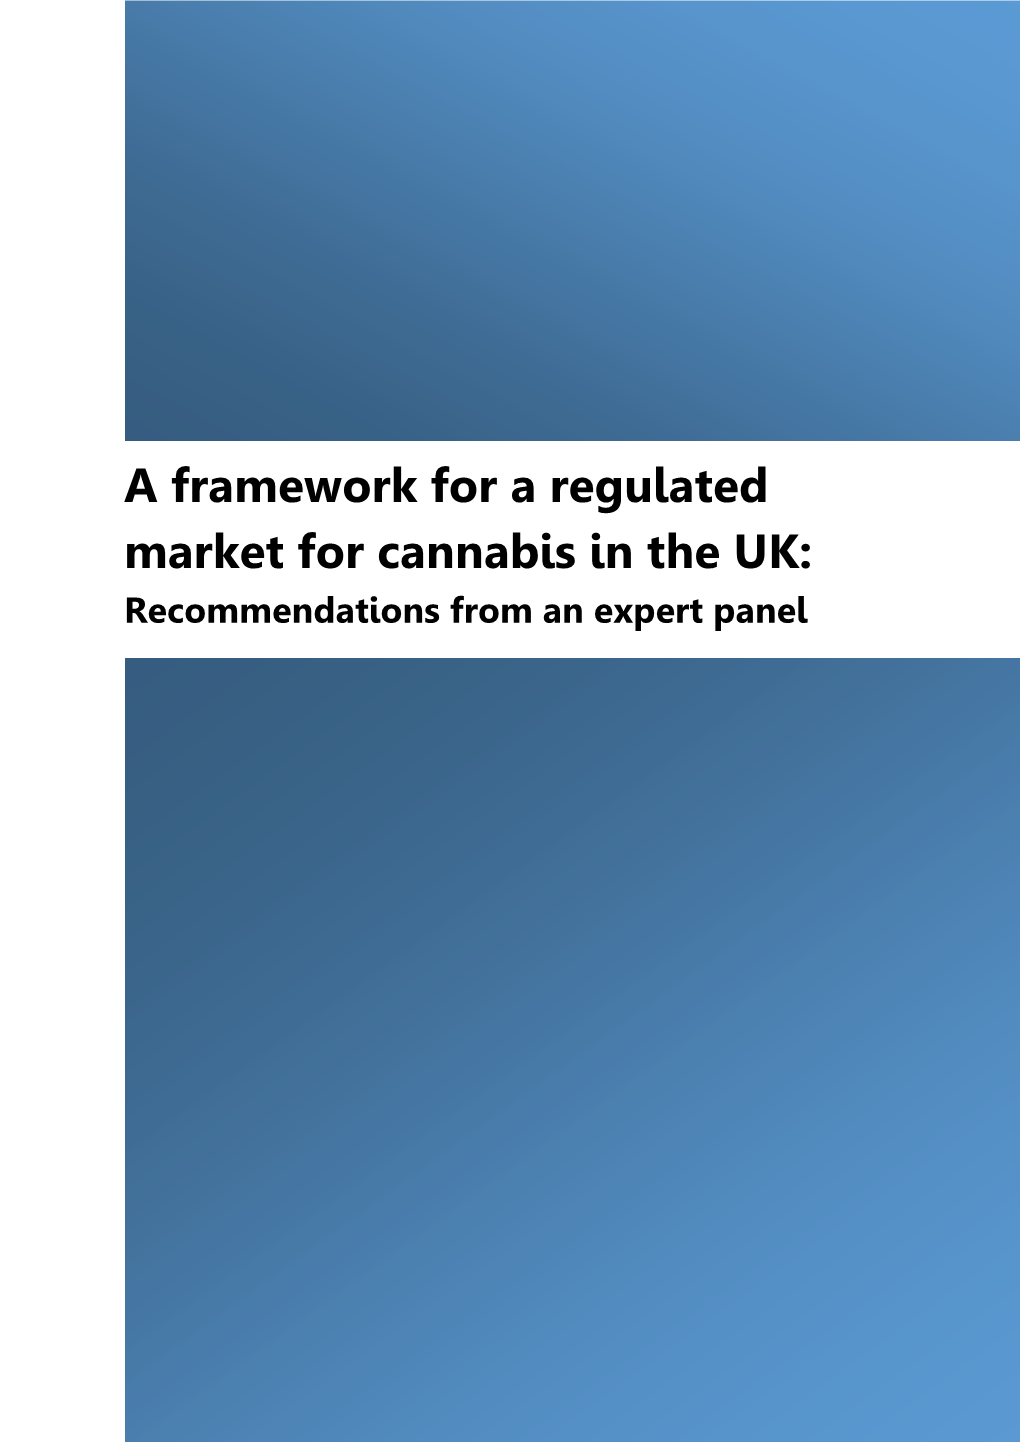 PDF (A Framework for a Regulated Market for Cannabis in The